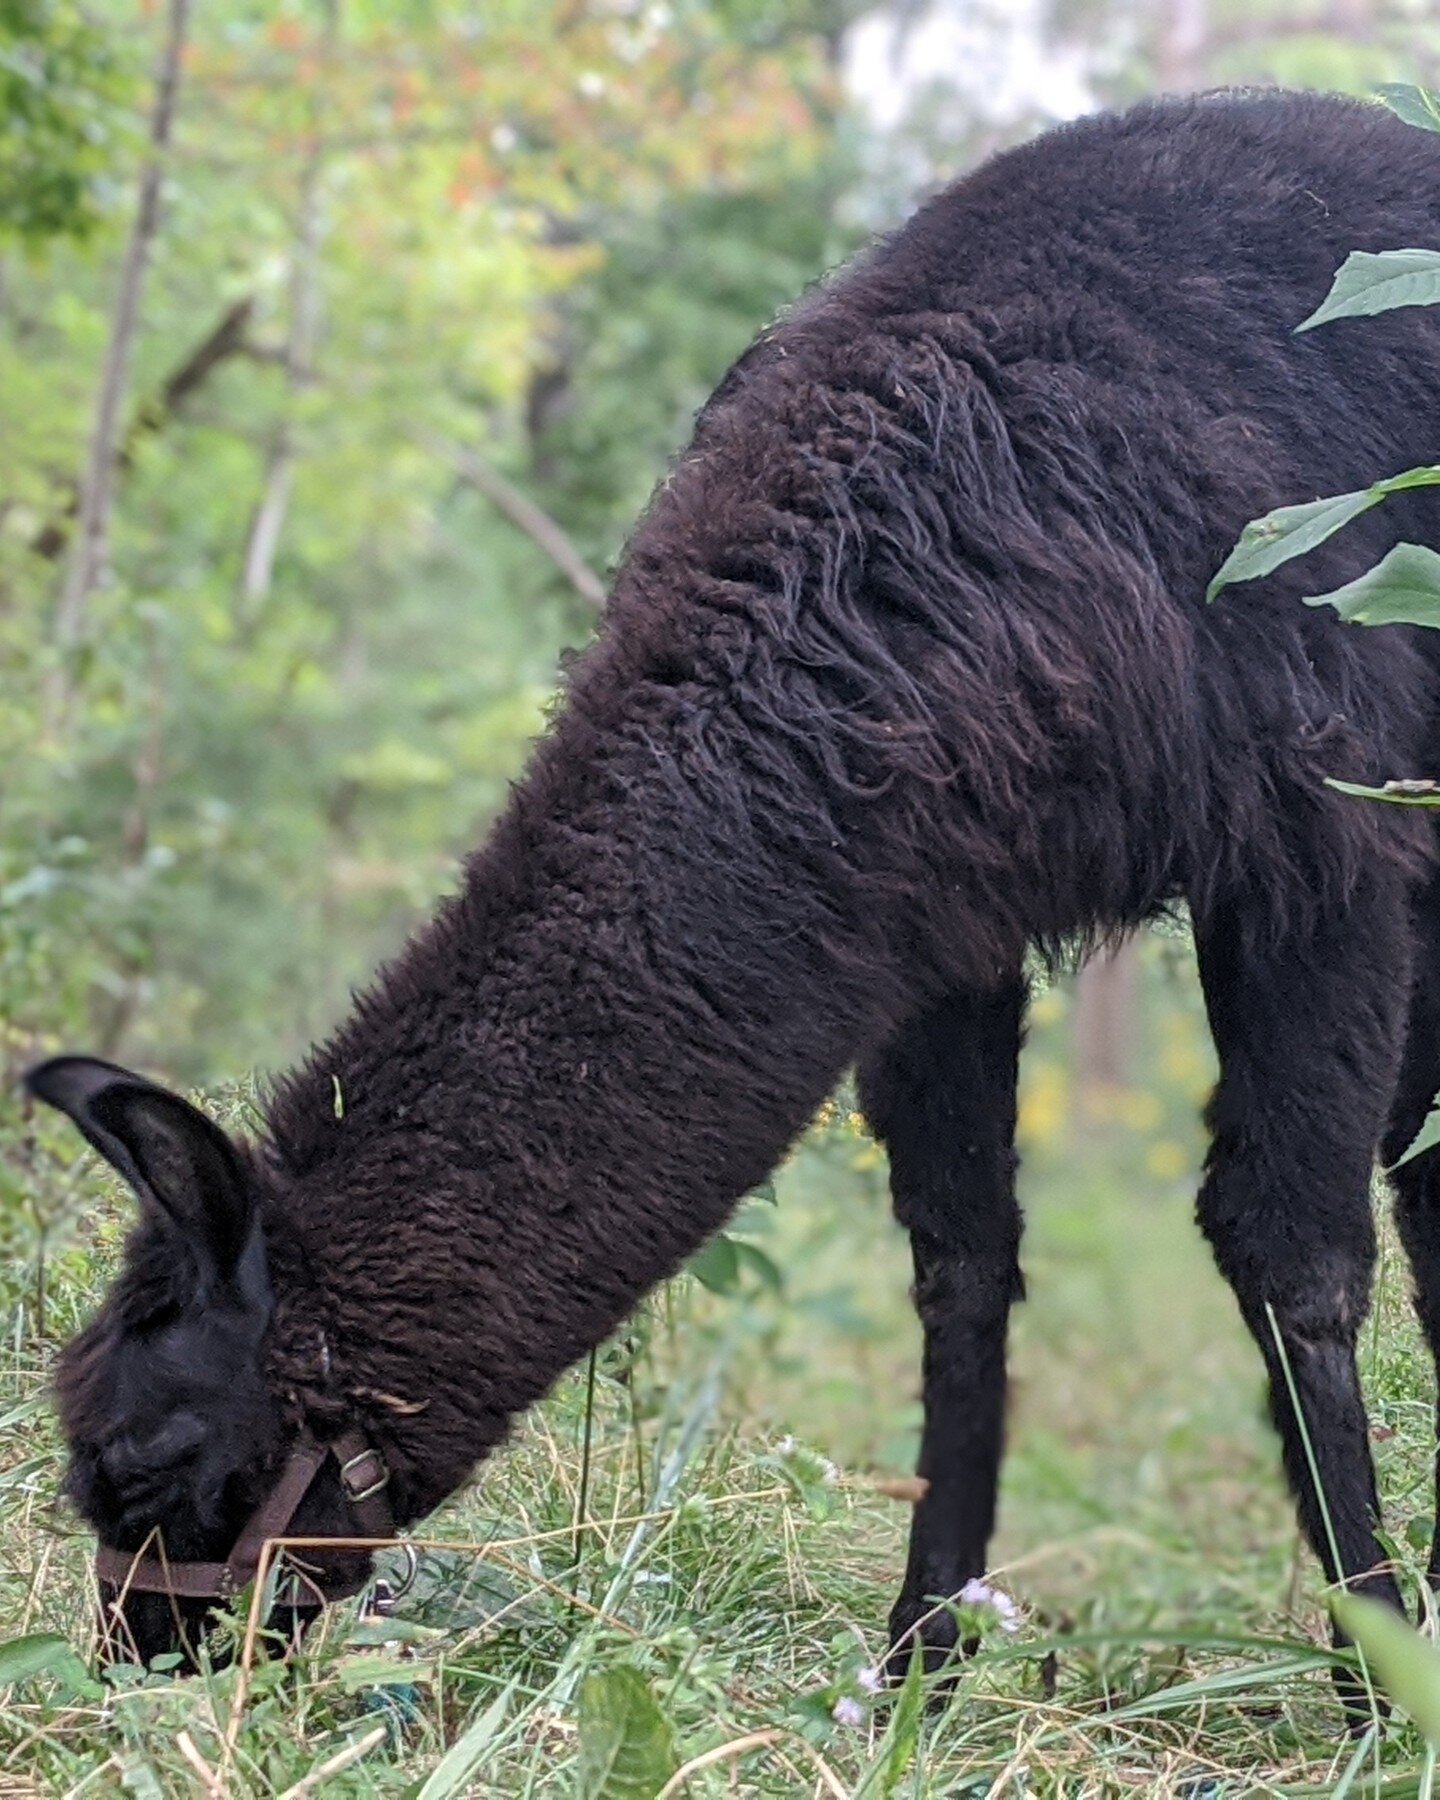 It is with great sadness that we share the death of our beloved llama and family member, Cacao. One of our first llamas, Cacao will be remembered as a llama ambassador, escape artist, herd trickster, and friend to all. 

I know many of you connected 